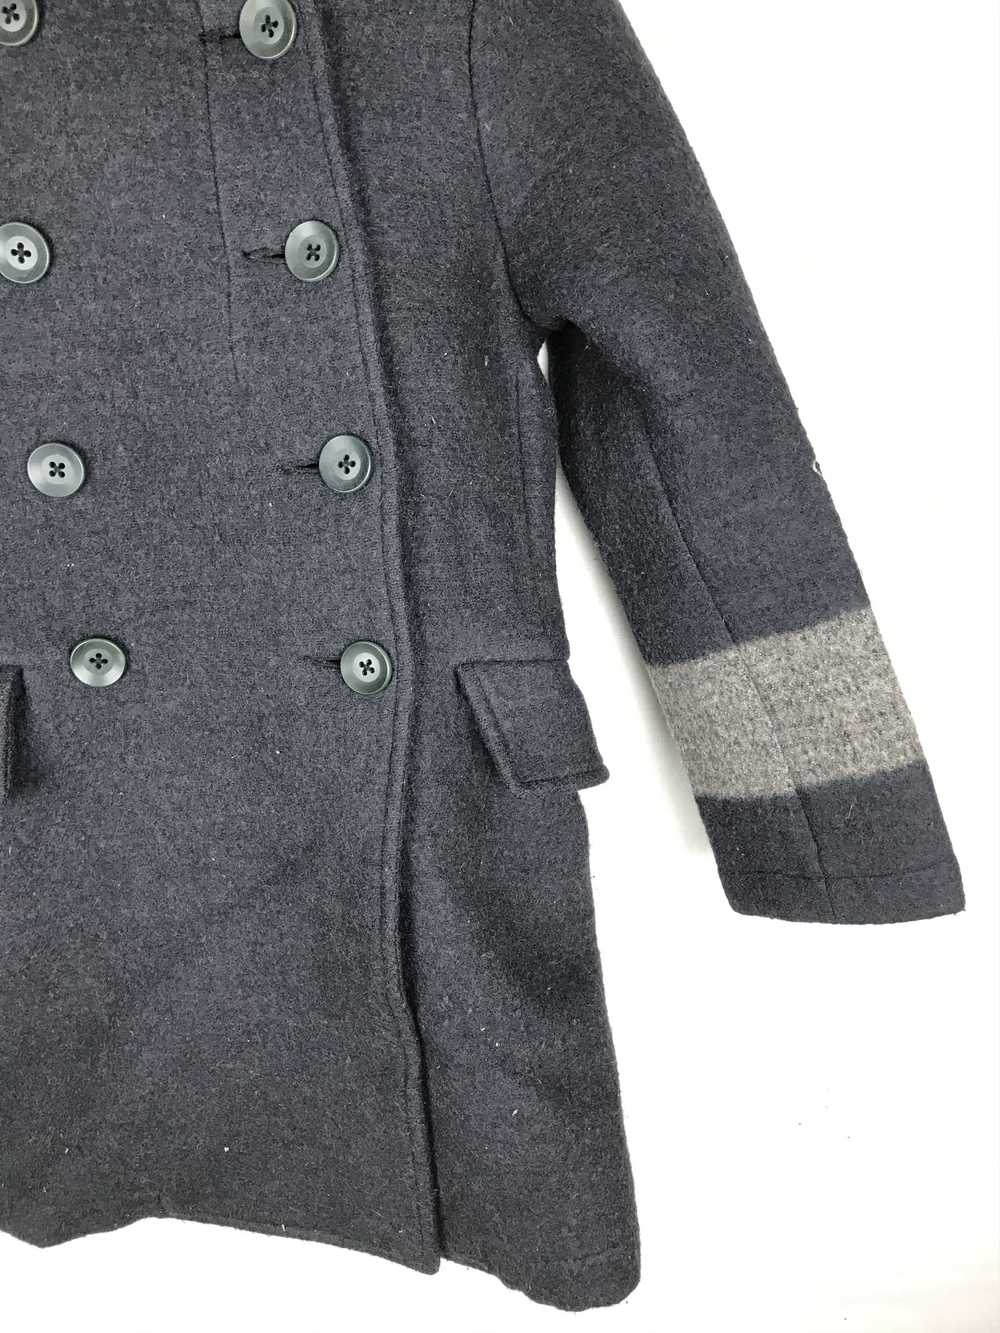 45rpm 45Rpm Wool Jacket, 100 % made in Japan - image 5